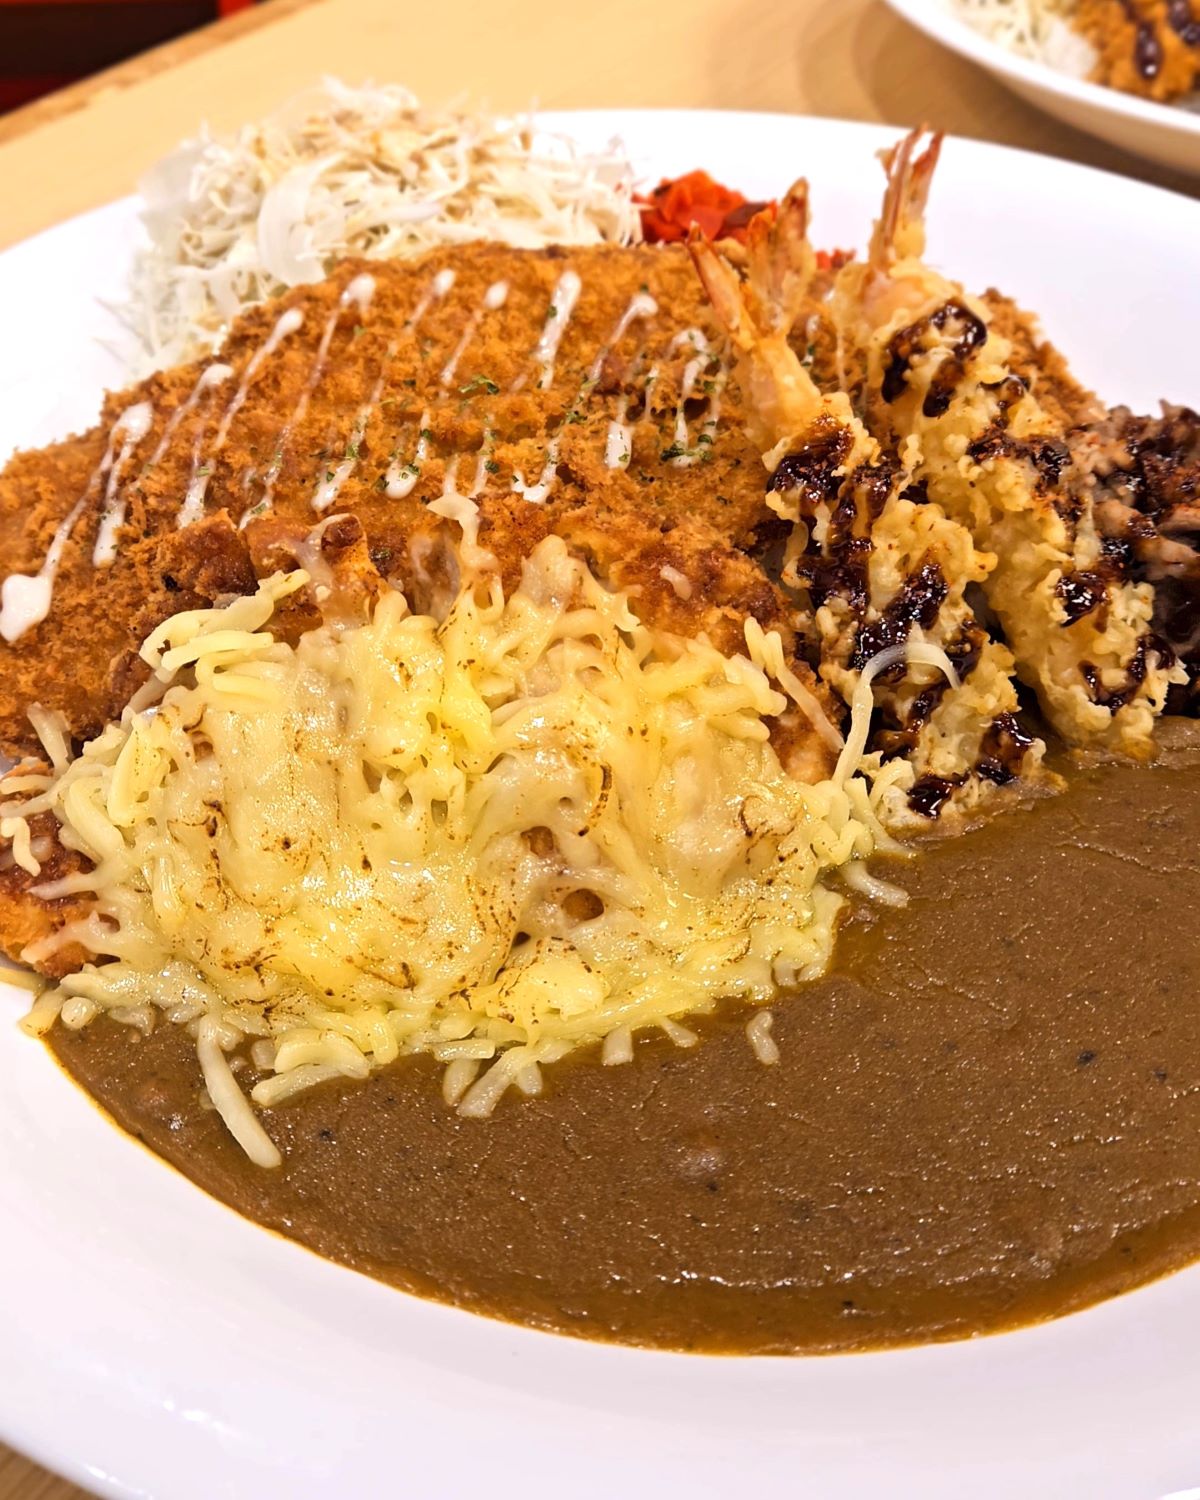 Singapore’s Leading Japanese Curry Chain Monster Curry Makes Jakarta Debut